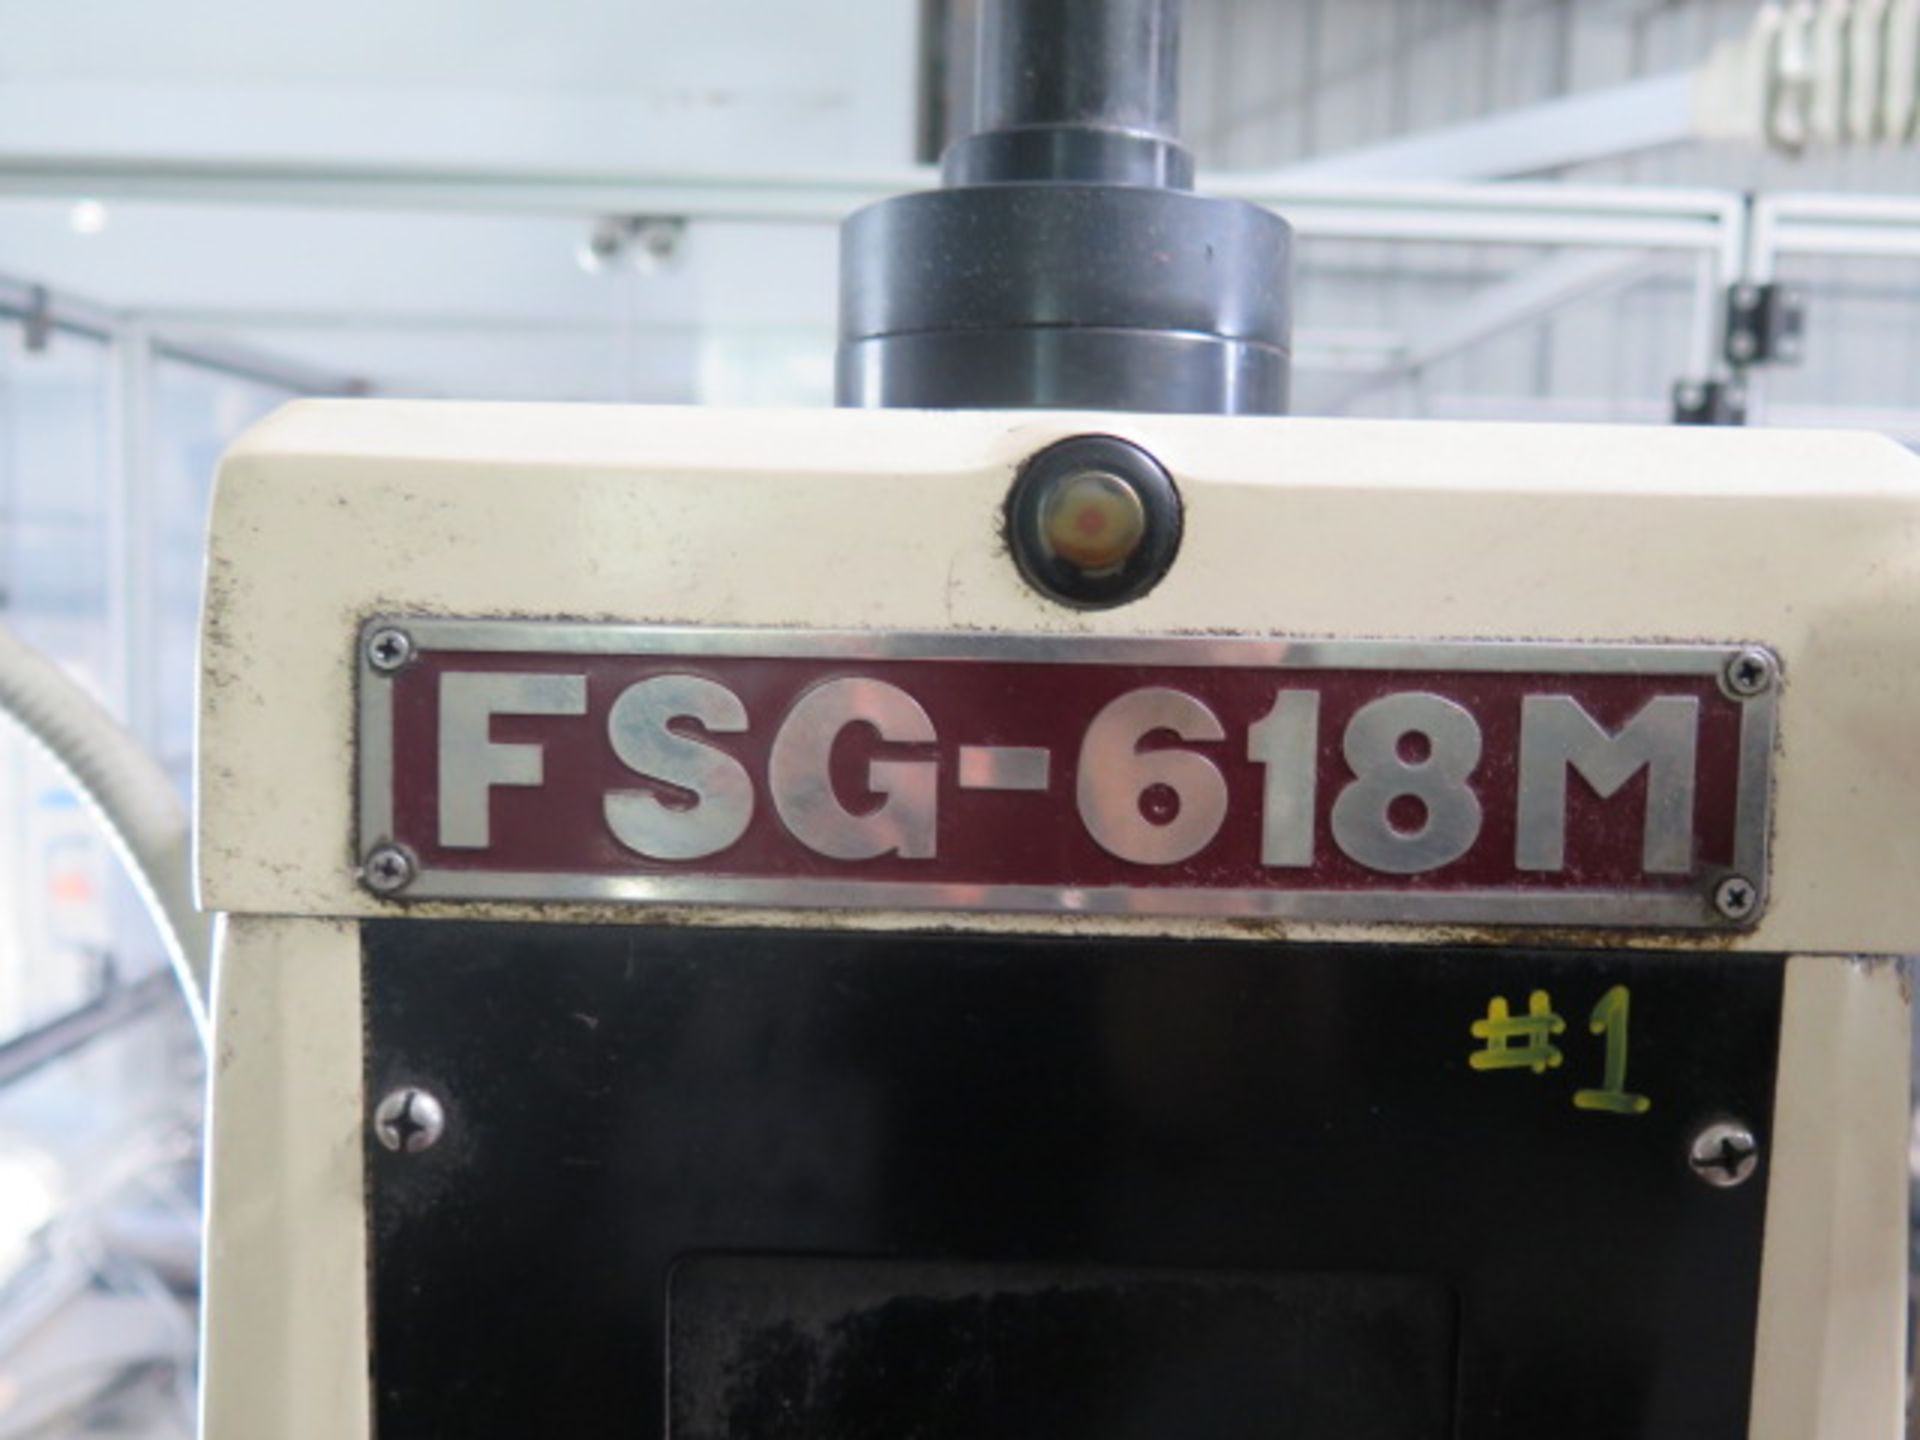 Falcon Chevalier FSG-618M 6” x 18” Surface Grinder s/n A3851006 w/ Sony LG10 DRO, SOLD AS IS - Image 14 of 14